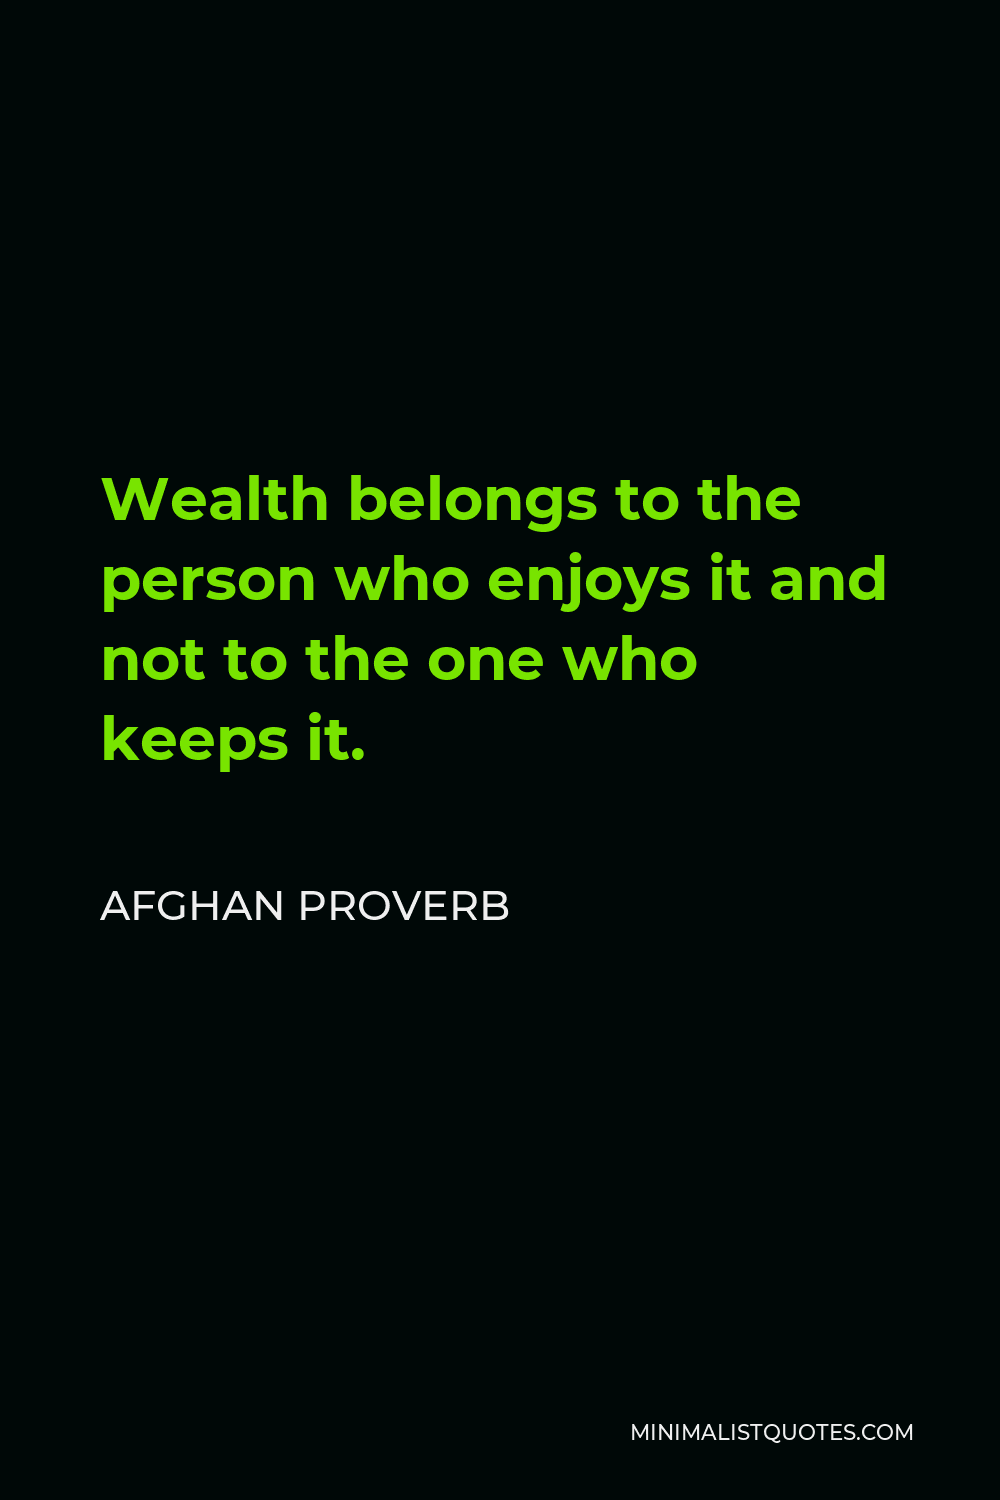 Afghan Proverb Quote - Wealth belongs to the person who enjoys it and not to the one who keeps it.